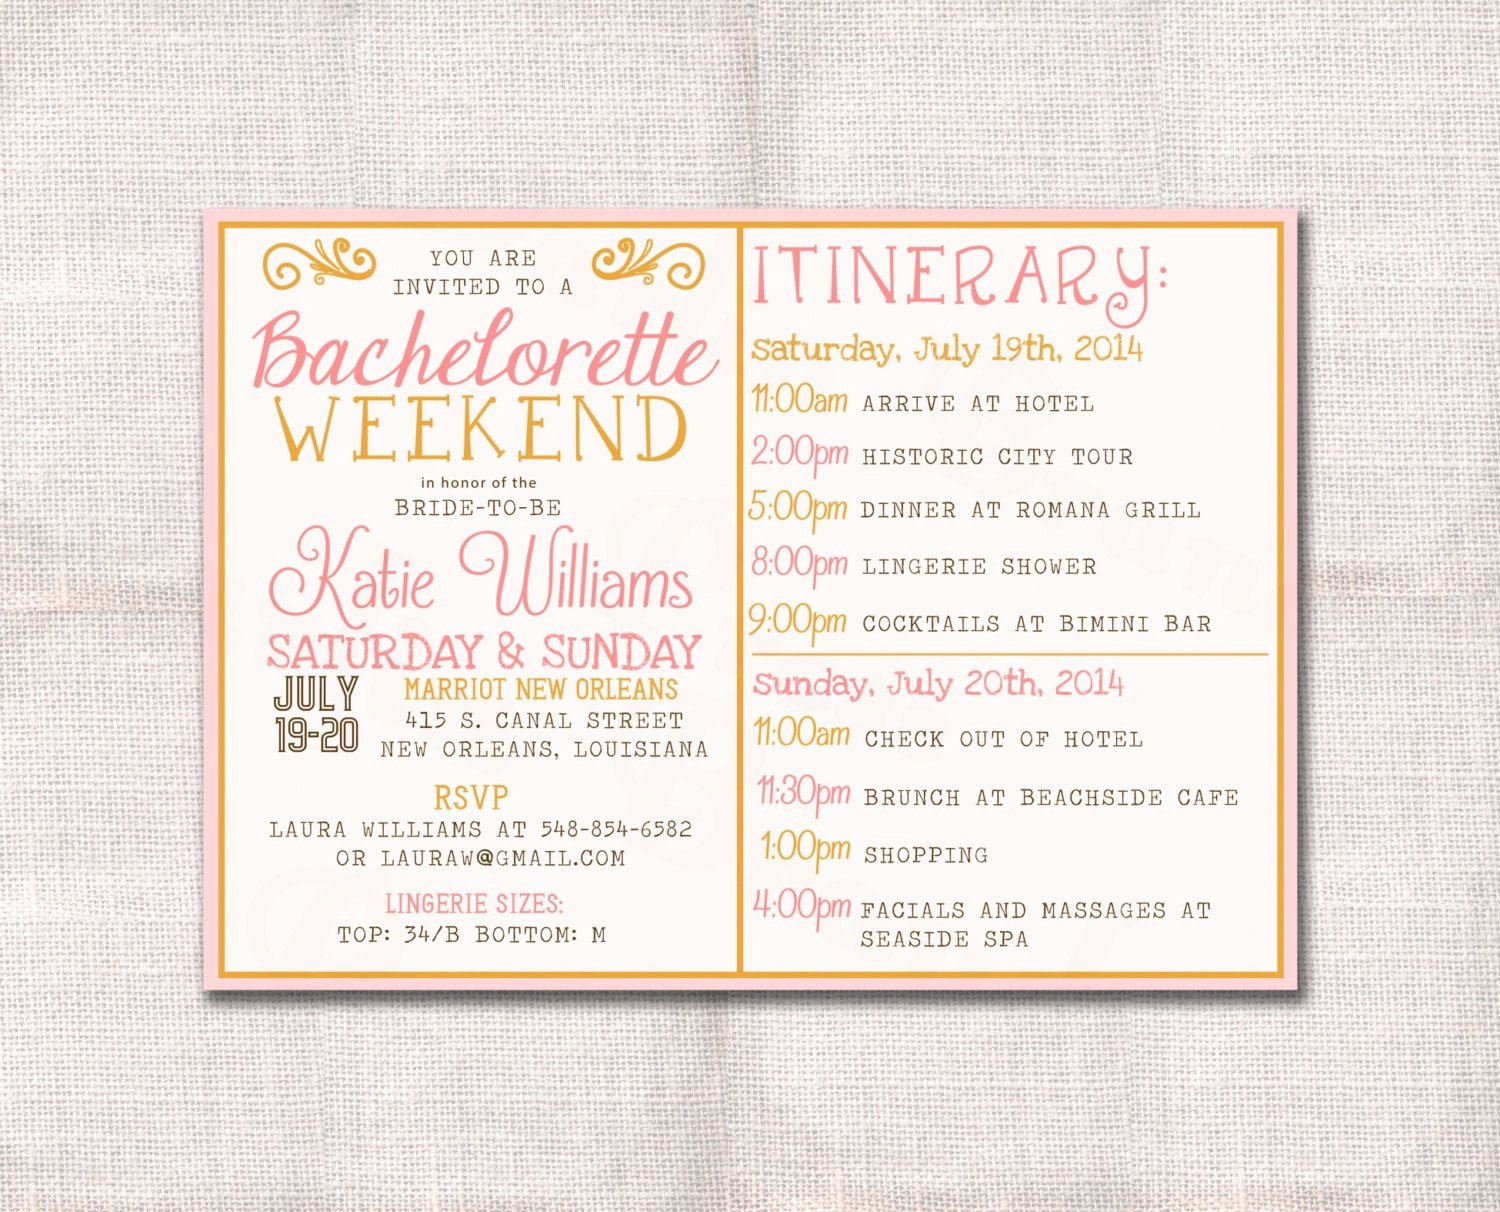 Free Bachelorette Itinerary Template Lovely Bachelorette Party Weekend Invitation and Itinerary Custom